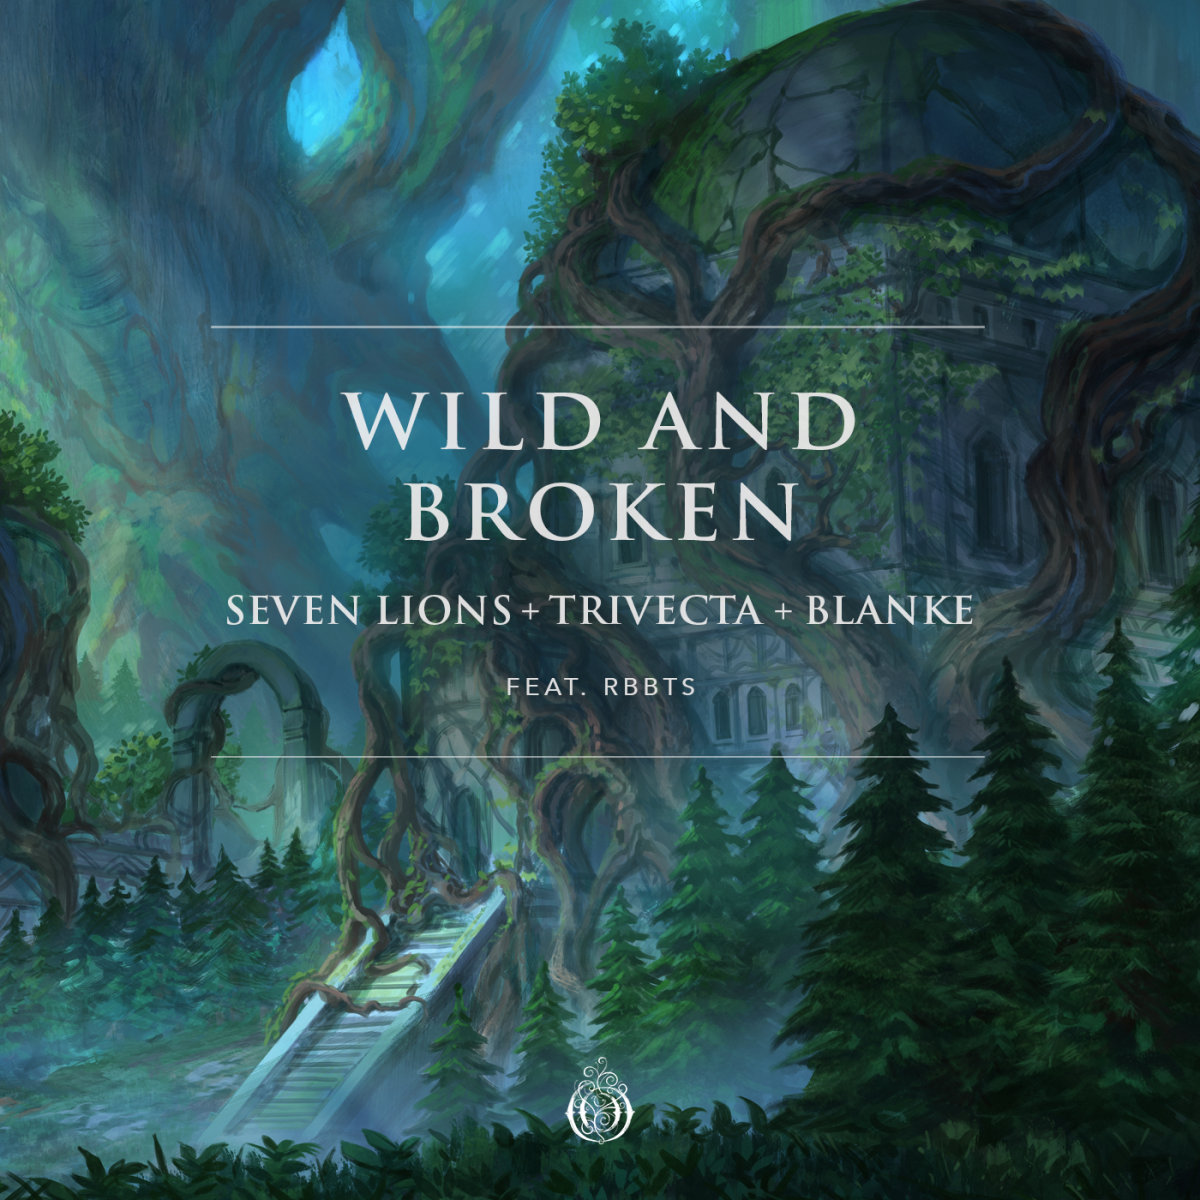 Artwork for Seven Lions, Trivecta, Blanke, and RBBTS' "Wild And Broken."